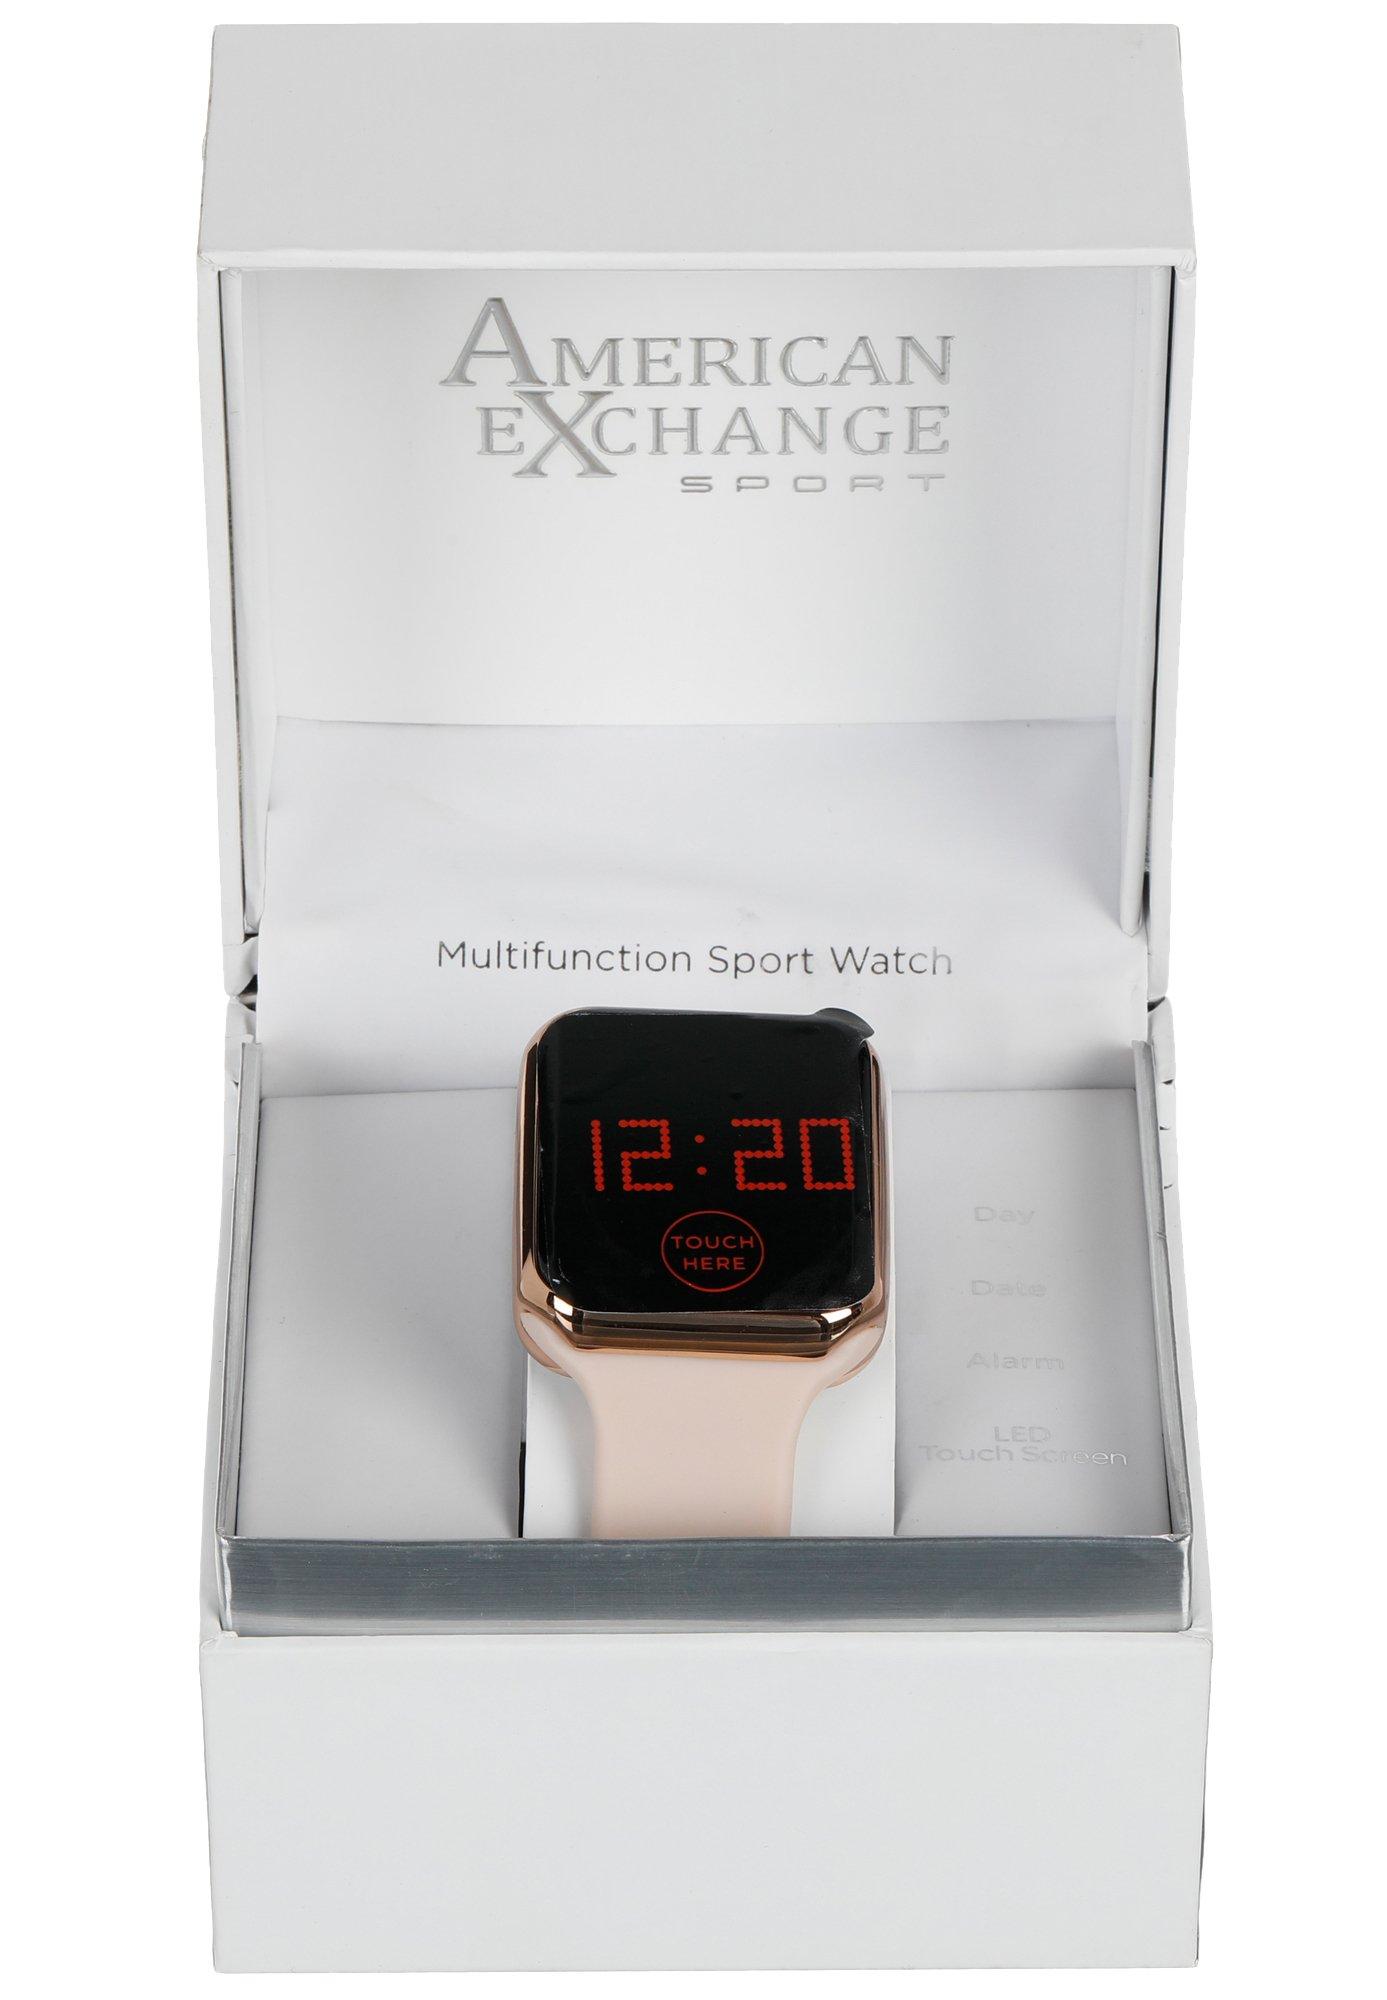 american exchange touch screen watch